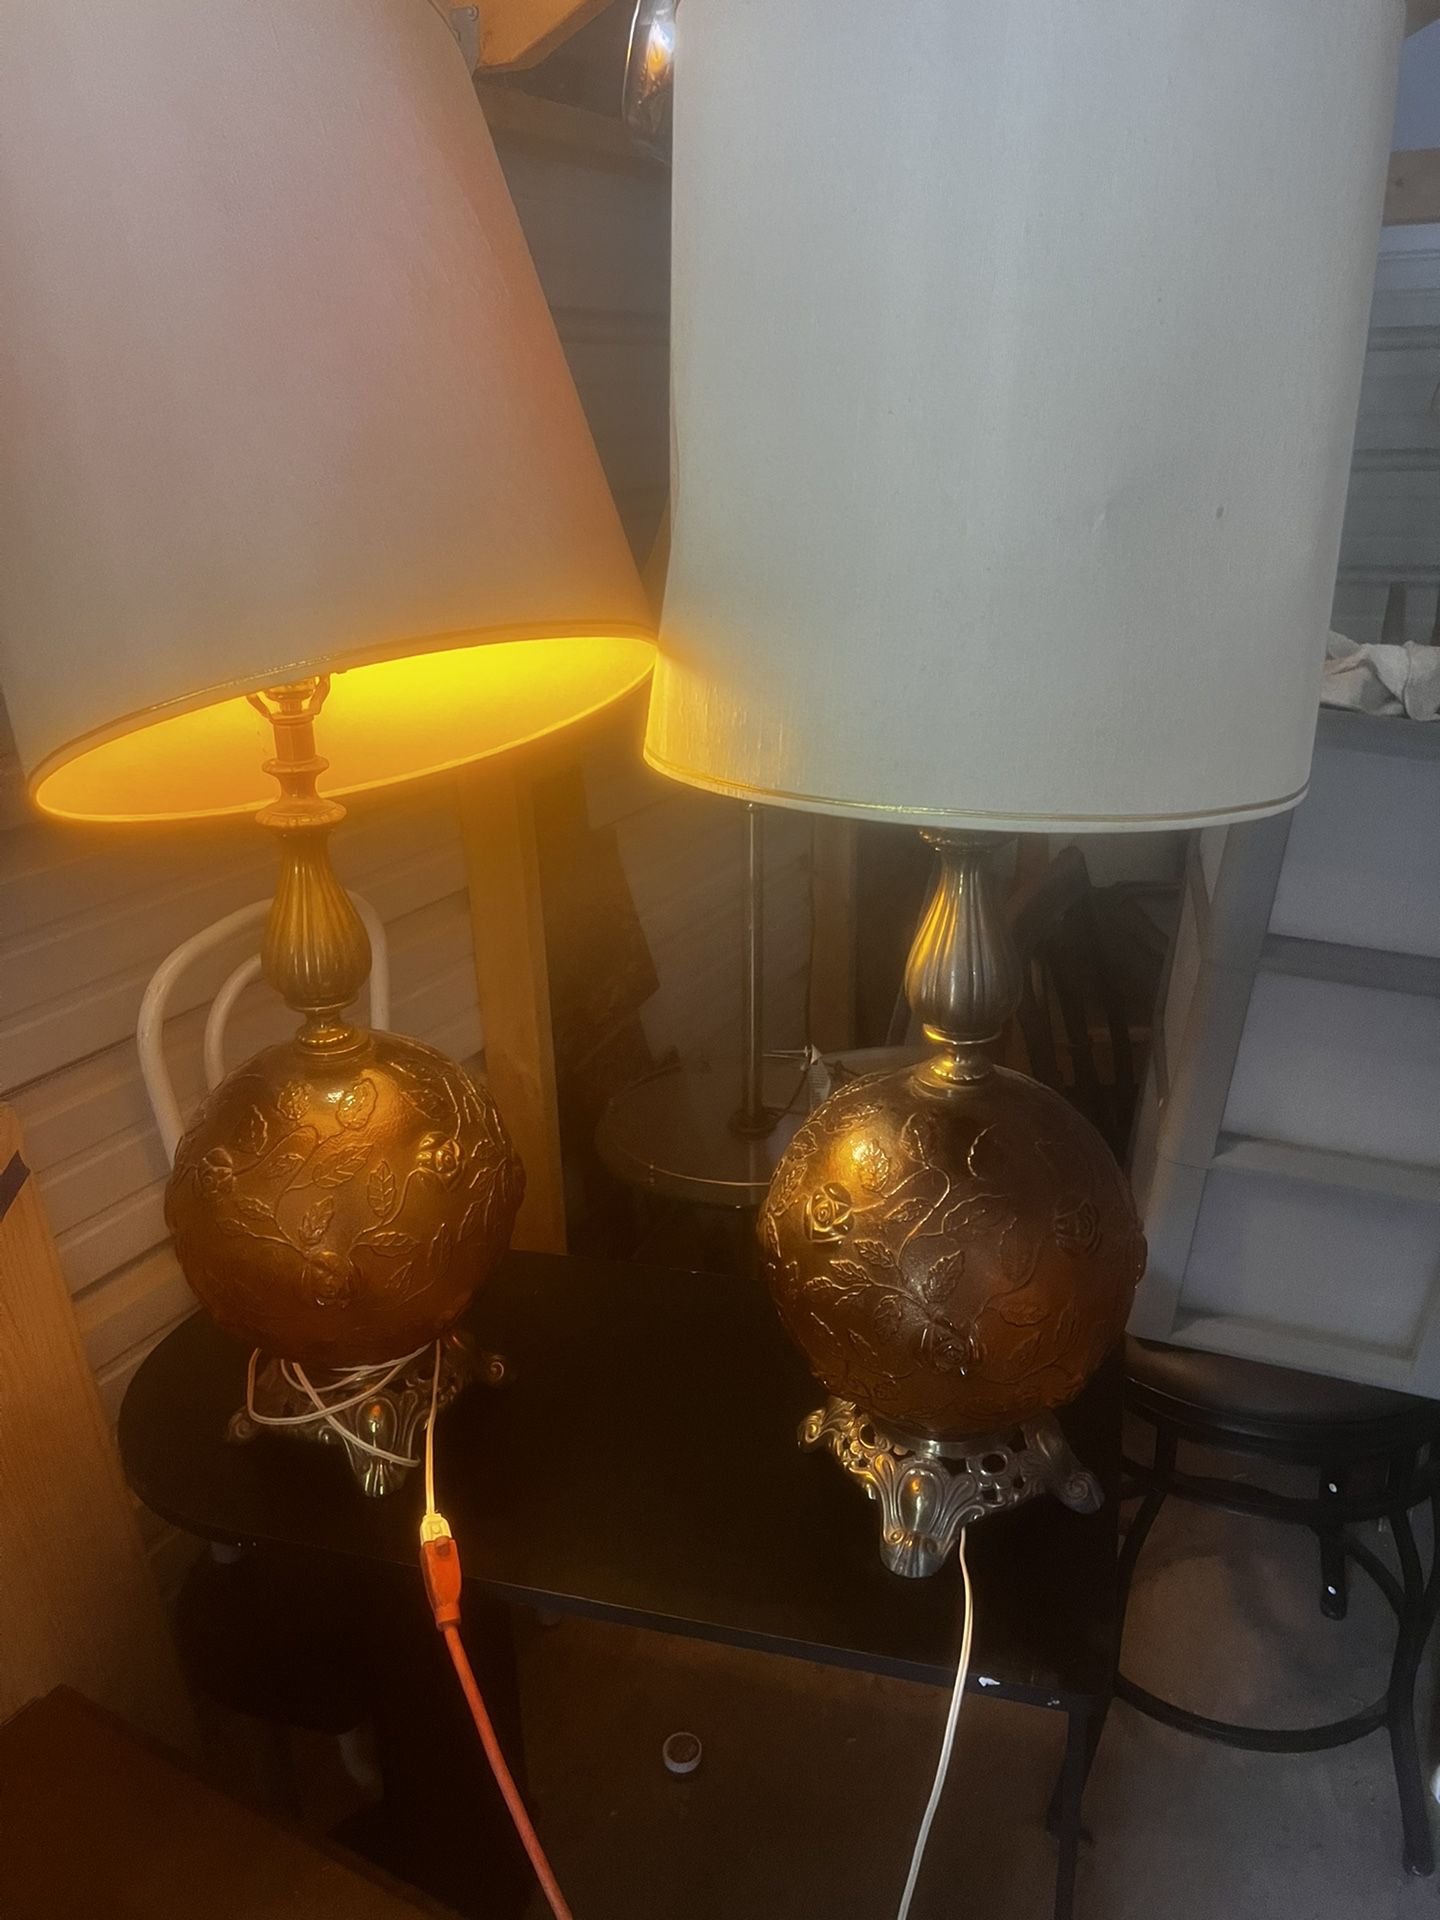 A Pait Of Beutiful Midcentury Lamps That Work As They Shoukd